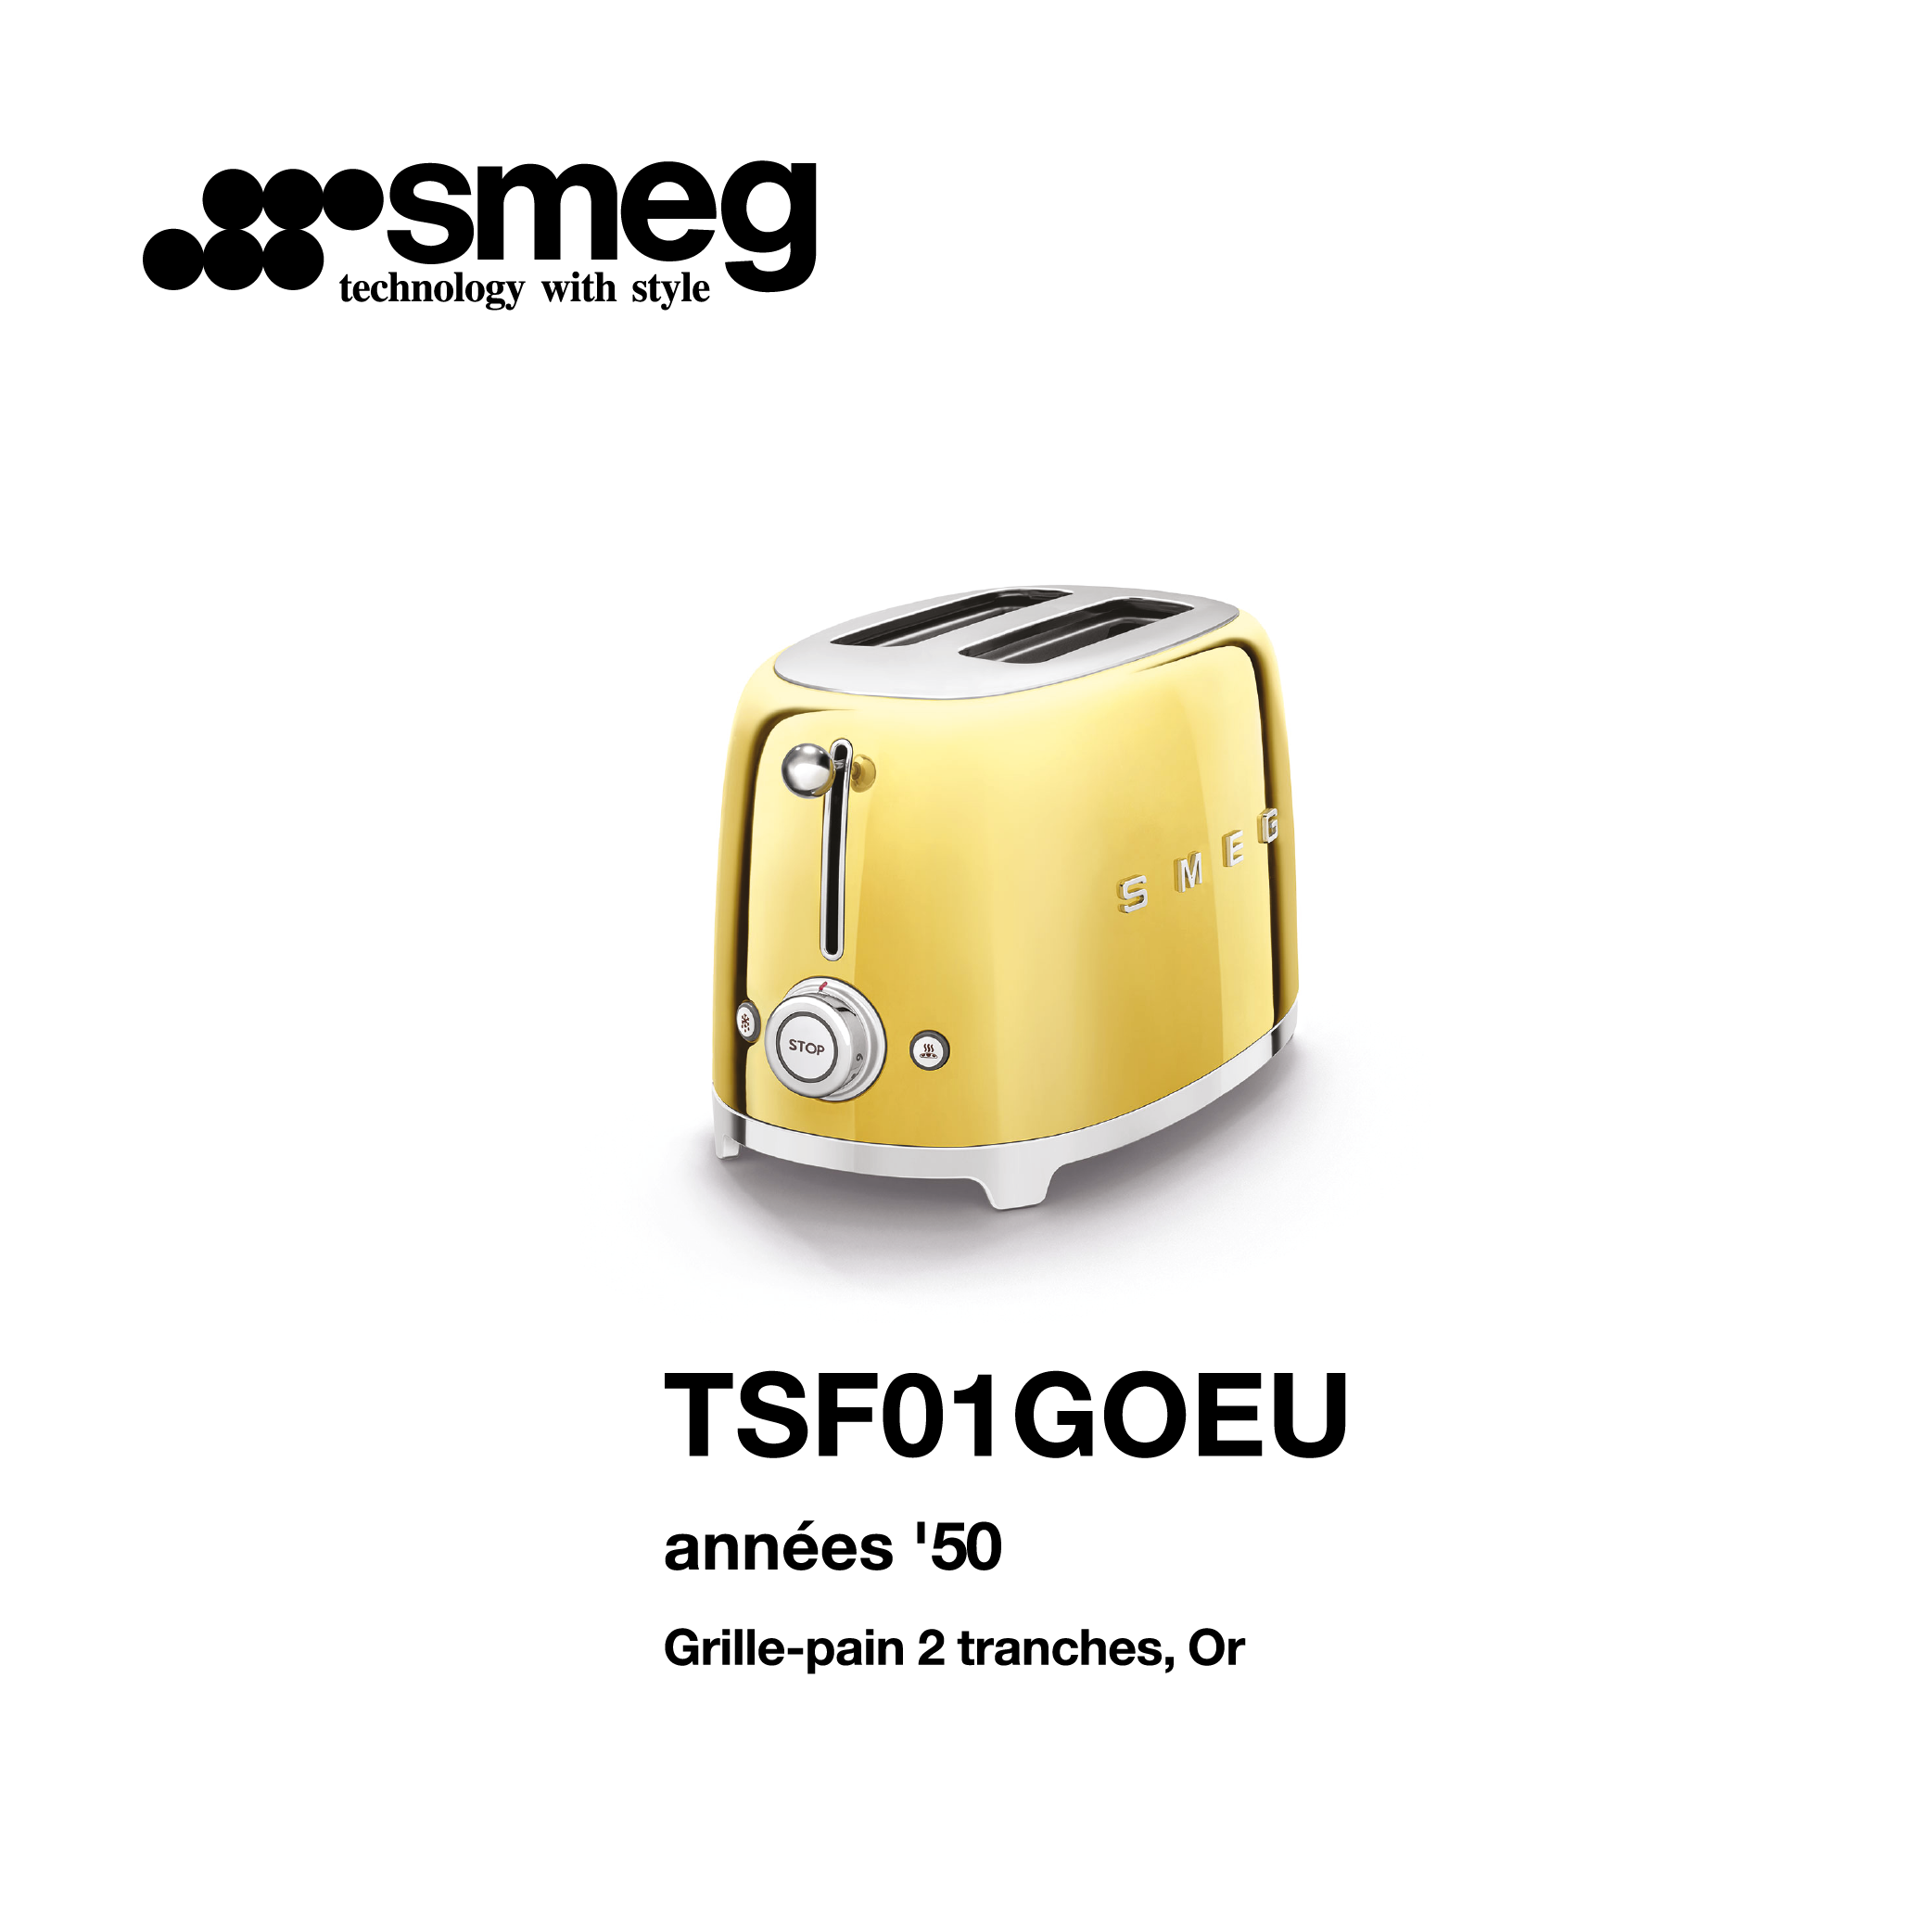 Grille-pain 2 tranches smeg Couelur Or TSF01GOEU